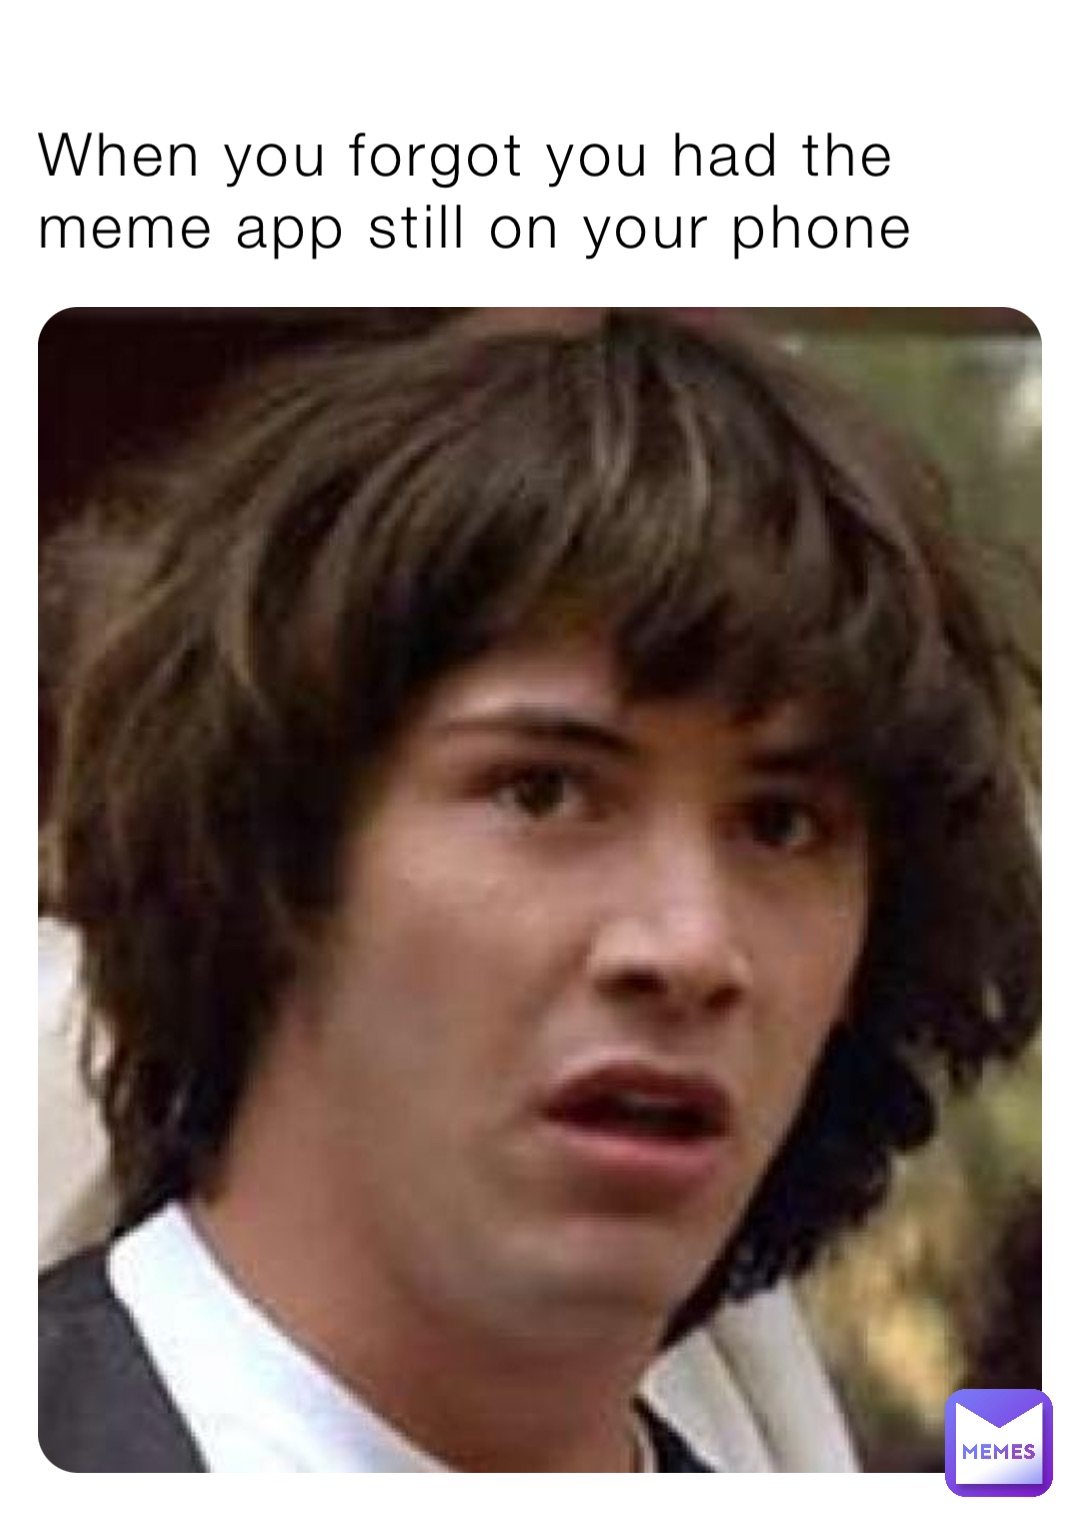 When you forgot you had the meme app still on your phone